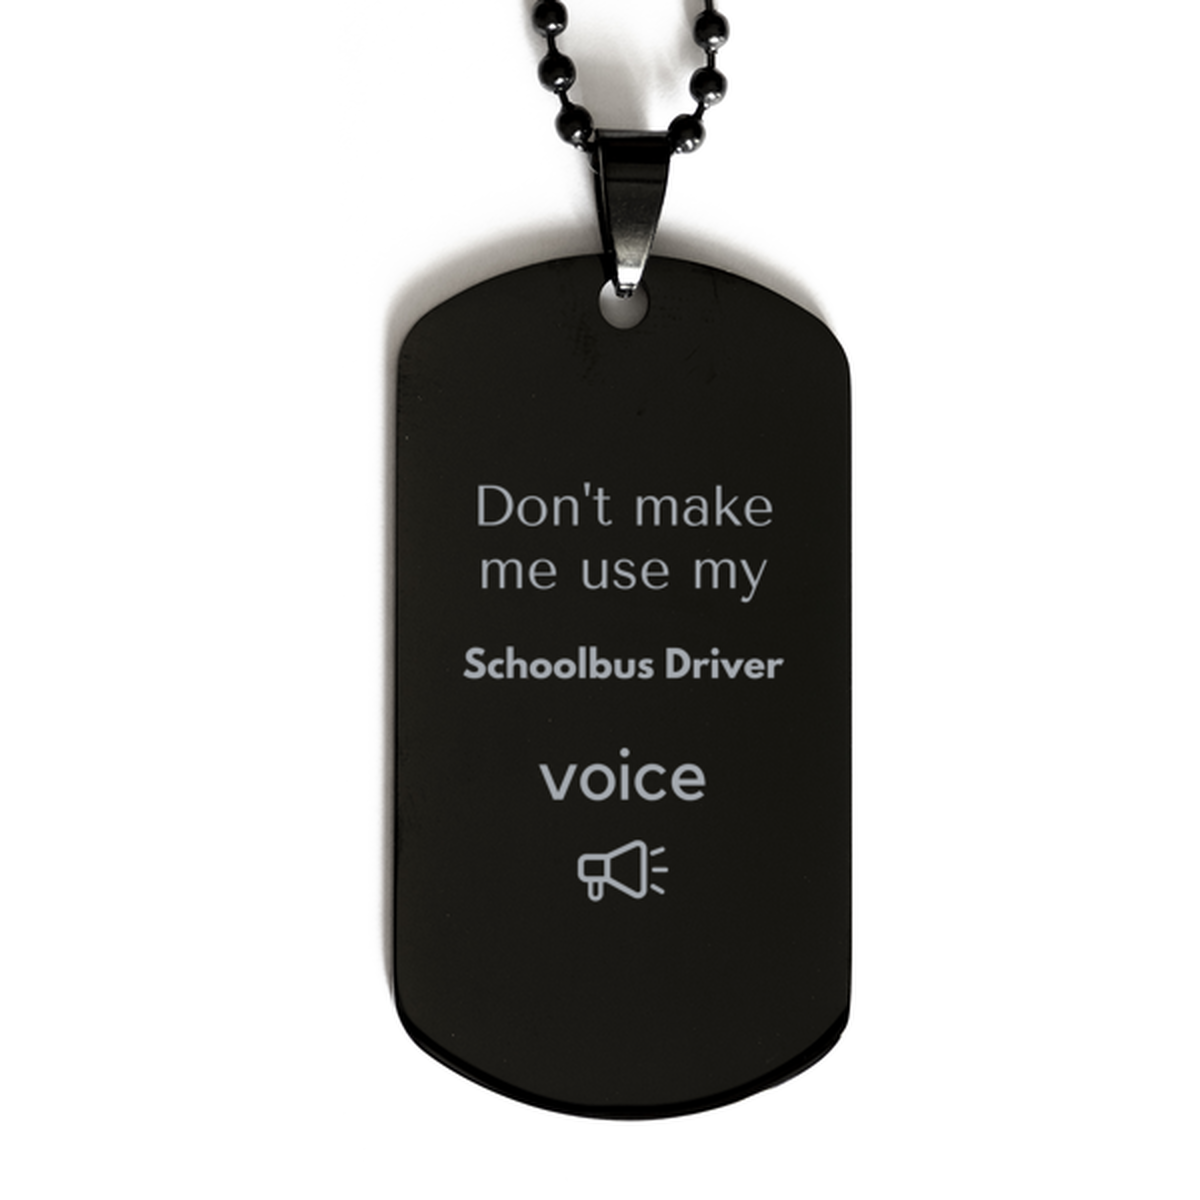 Don't make me use my Schoolbus Driver voice, Sarcasm Schoolbus Driver Gifts, Christmas Schoolbus Driver Black Dog Tag Birthday Unique Gifts For Schoolbus Driver Coworkers, Men, Women, Colleague, Friends